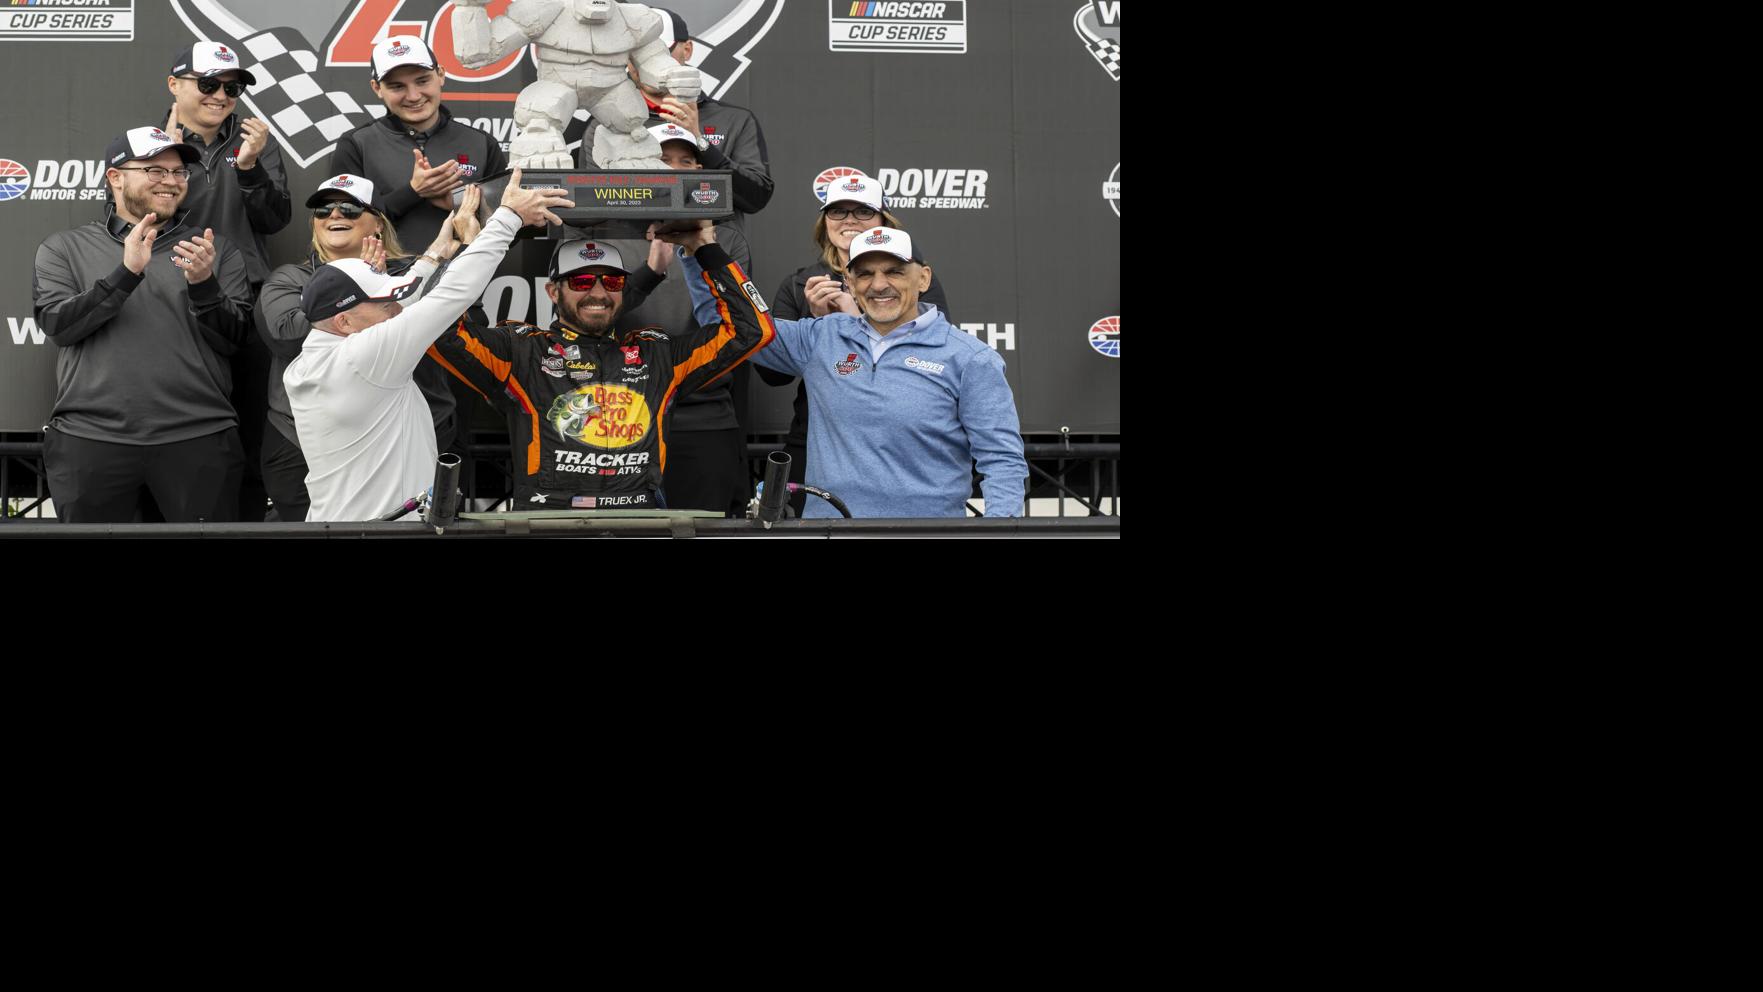 Martin Truex Jr. wins Cup Series race at Dover for 3rd time